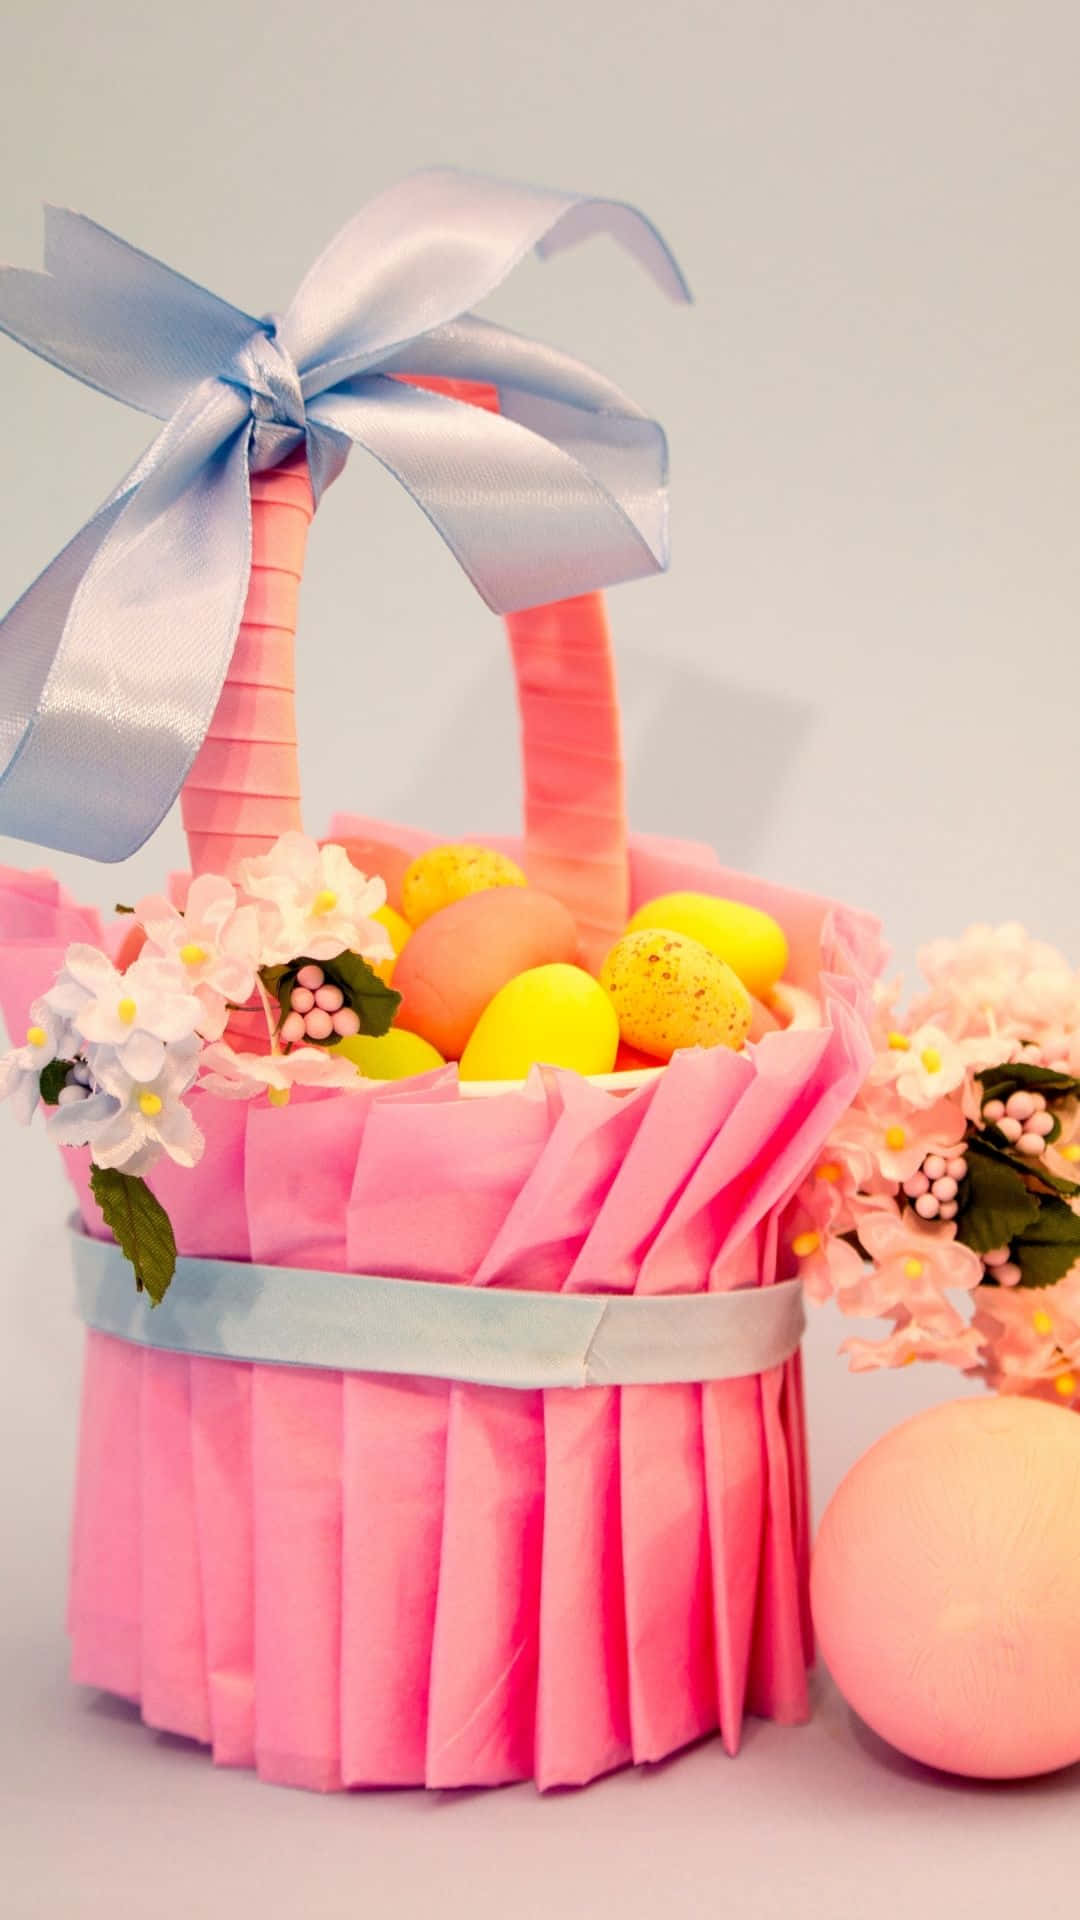 Customized Easter Basket with Colorful Chocolate Eggs Wallpaper